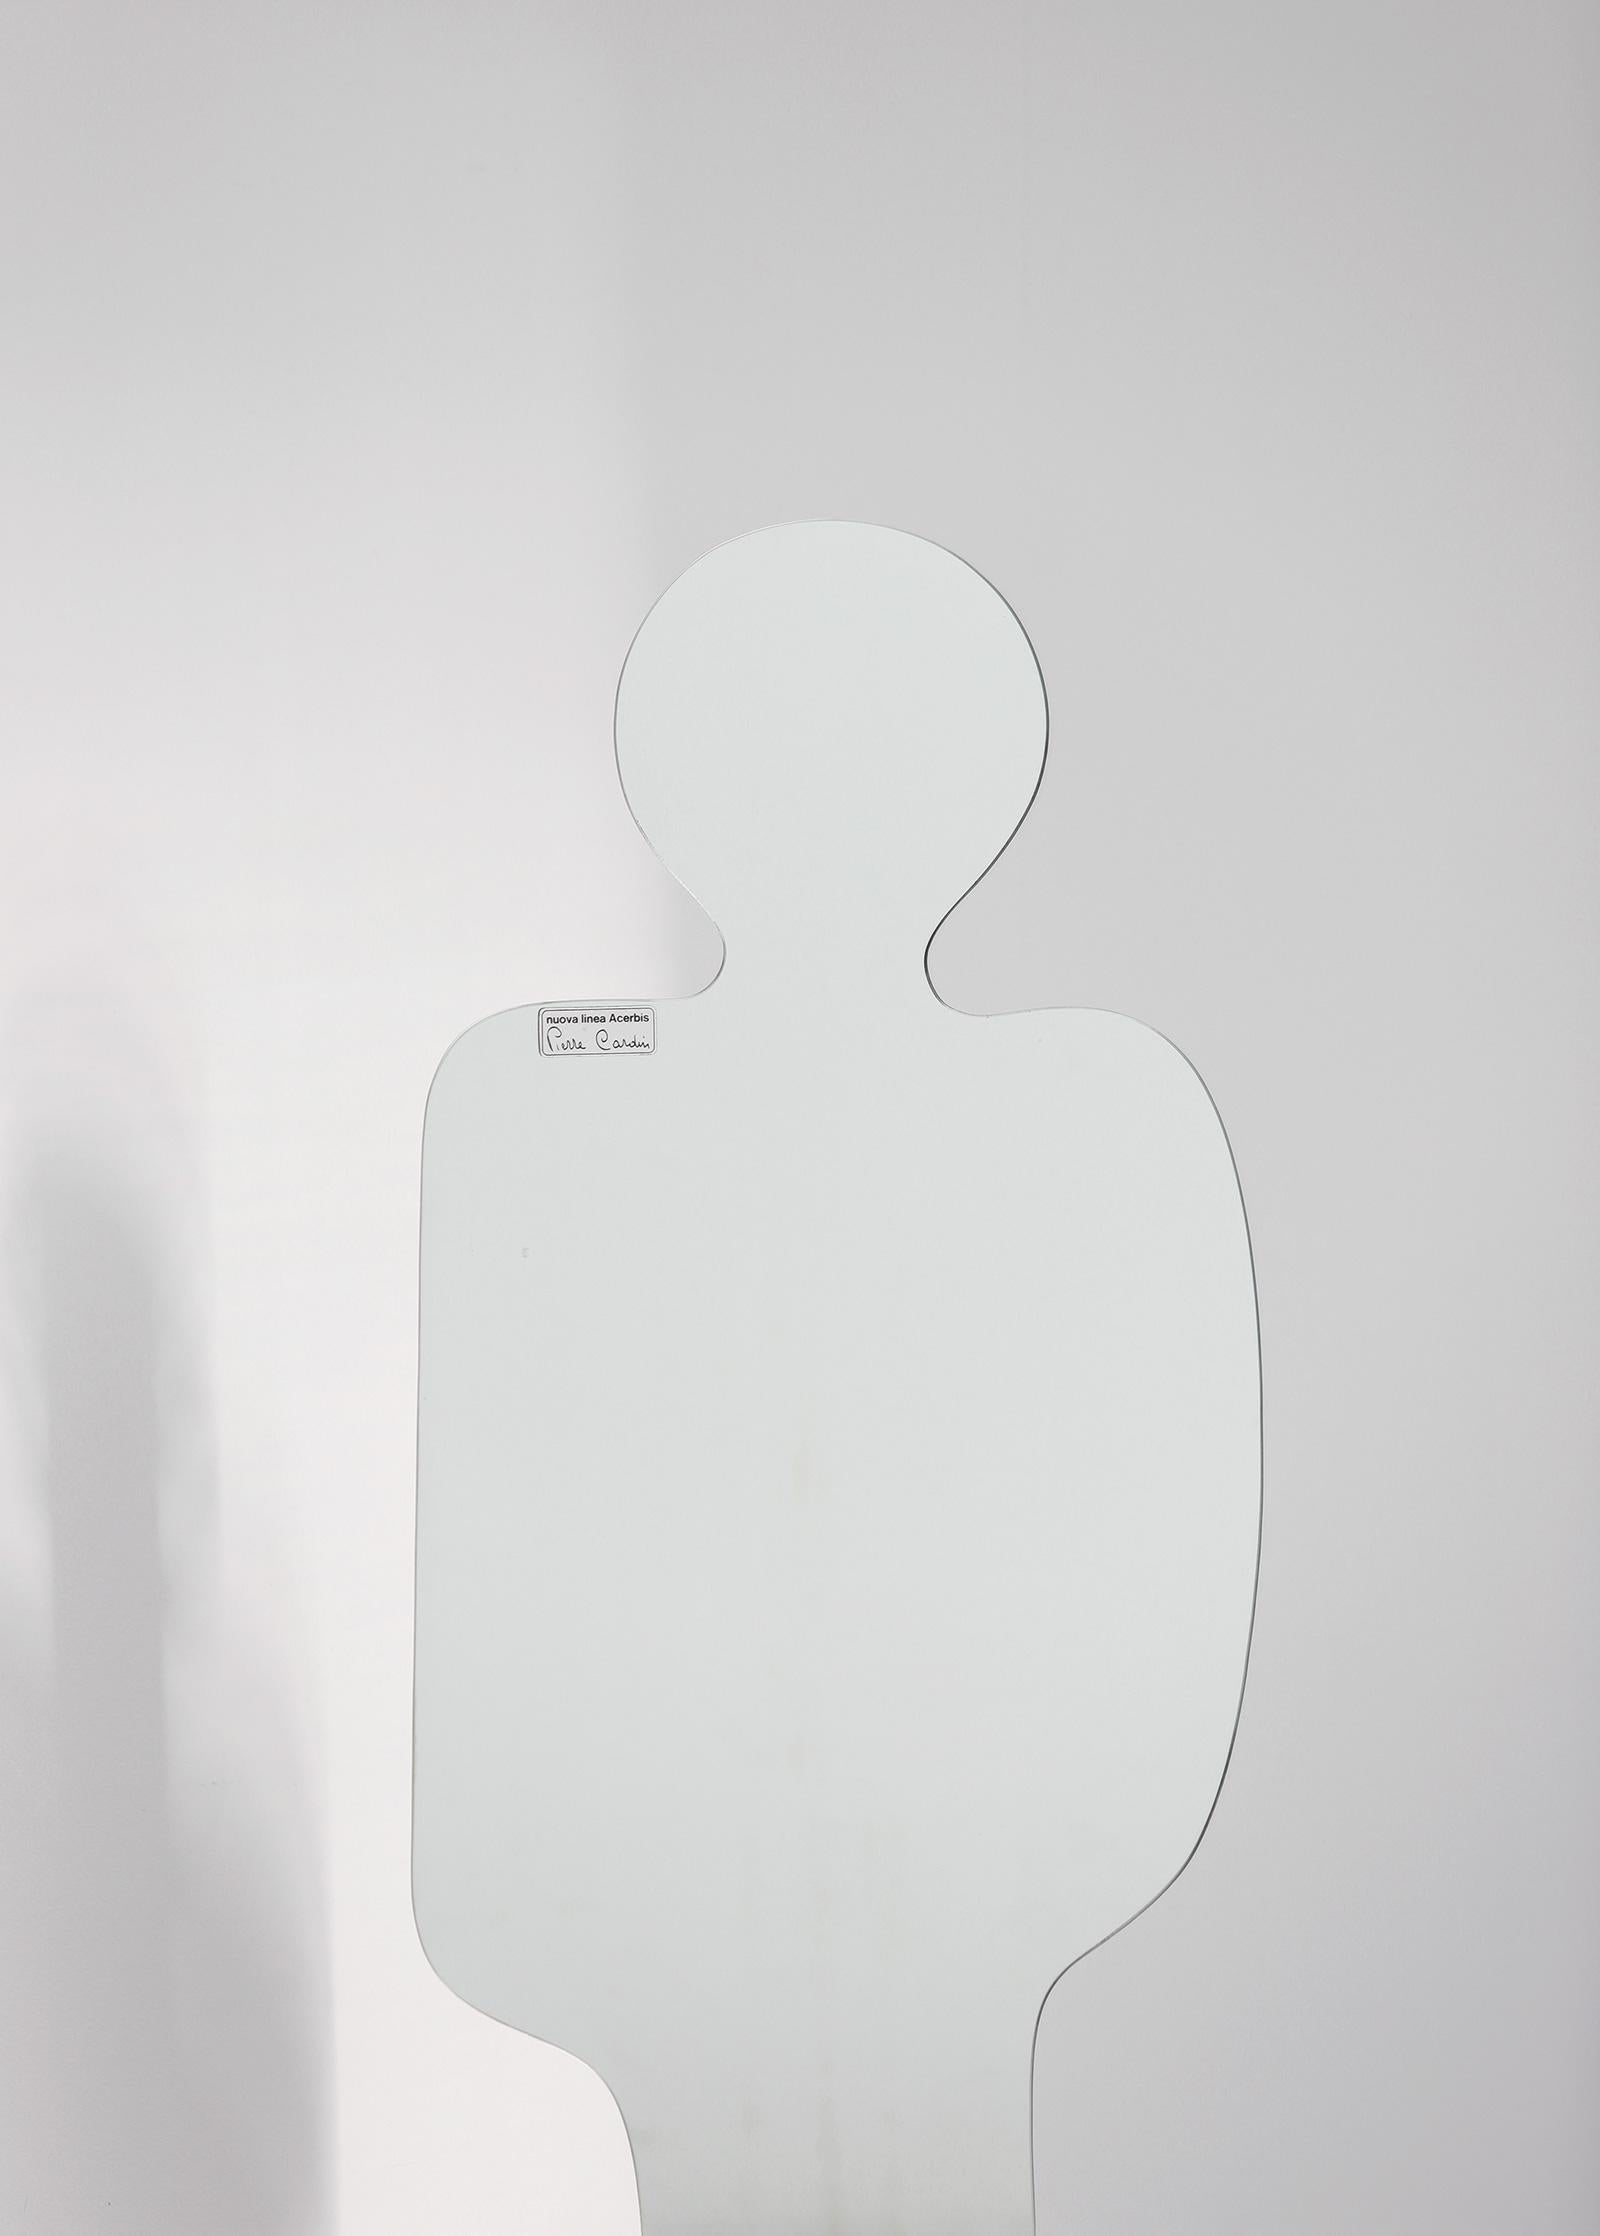 Mid-Century Modern Silhouette Shaped Mirror with Concrete Base by Pierre Cardin for Acerbis, 1970s